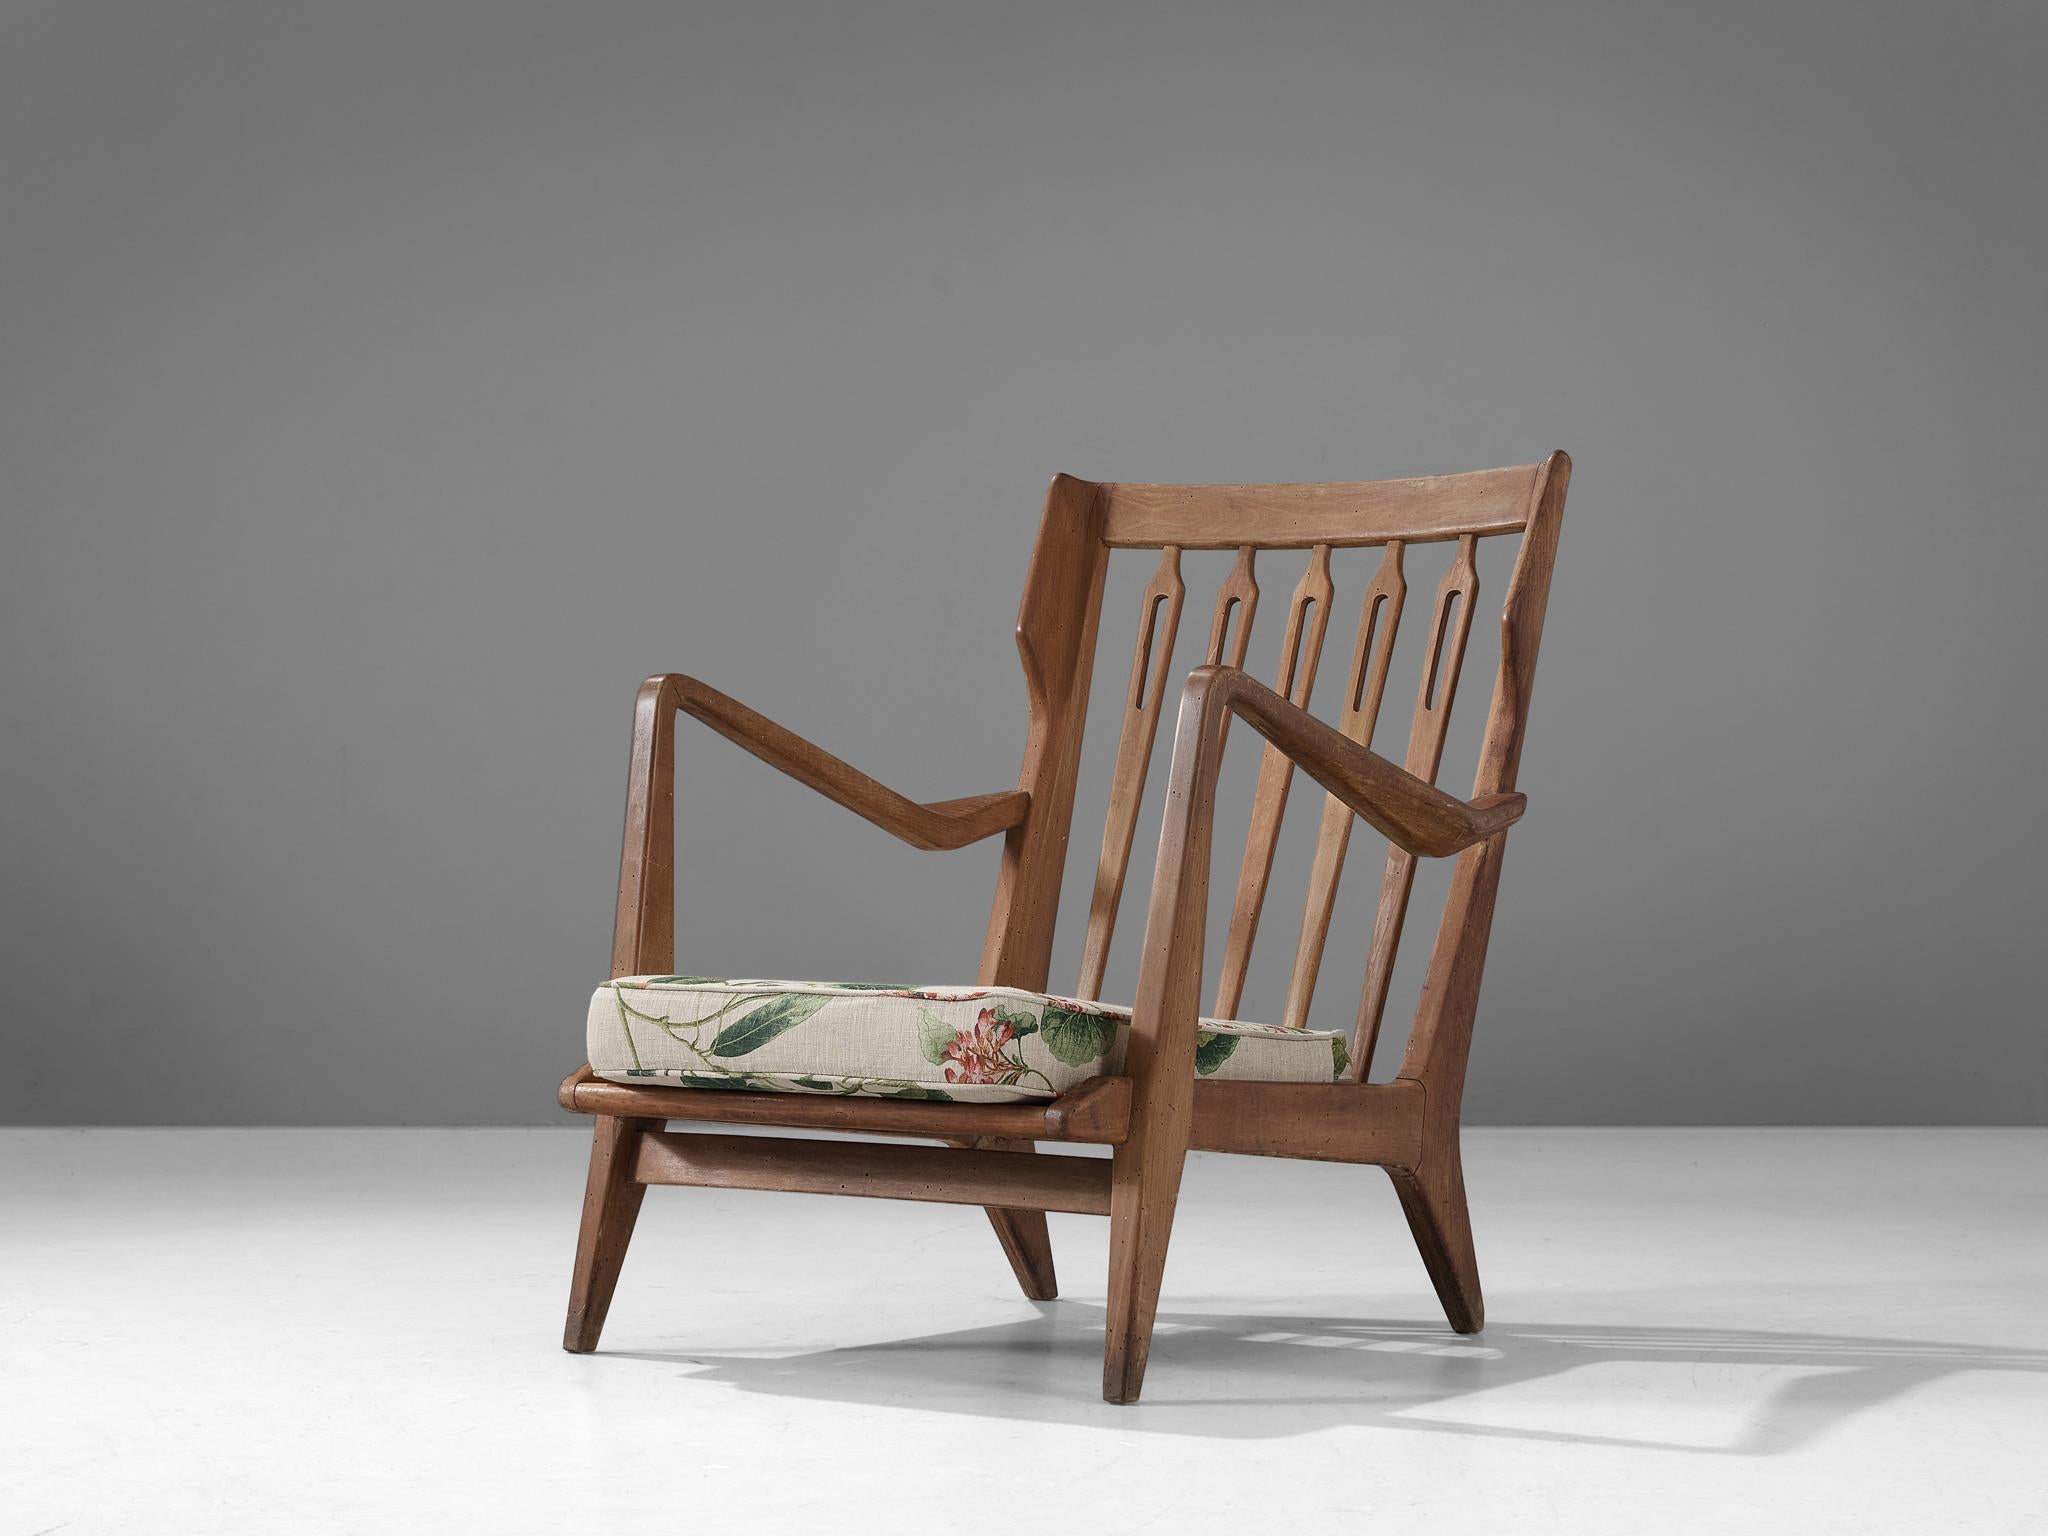 Gio Ponti for Cassina, armchair model 516, stained wood, flower print upholstery, Italy, 1955.

This chair is designed by Gio Ponti and manufactured by Cassina. The chair has a few distinct features that stand out. For instance the sculptural,